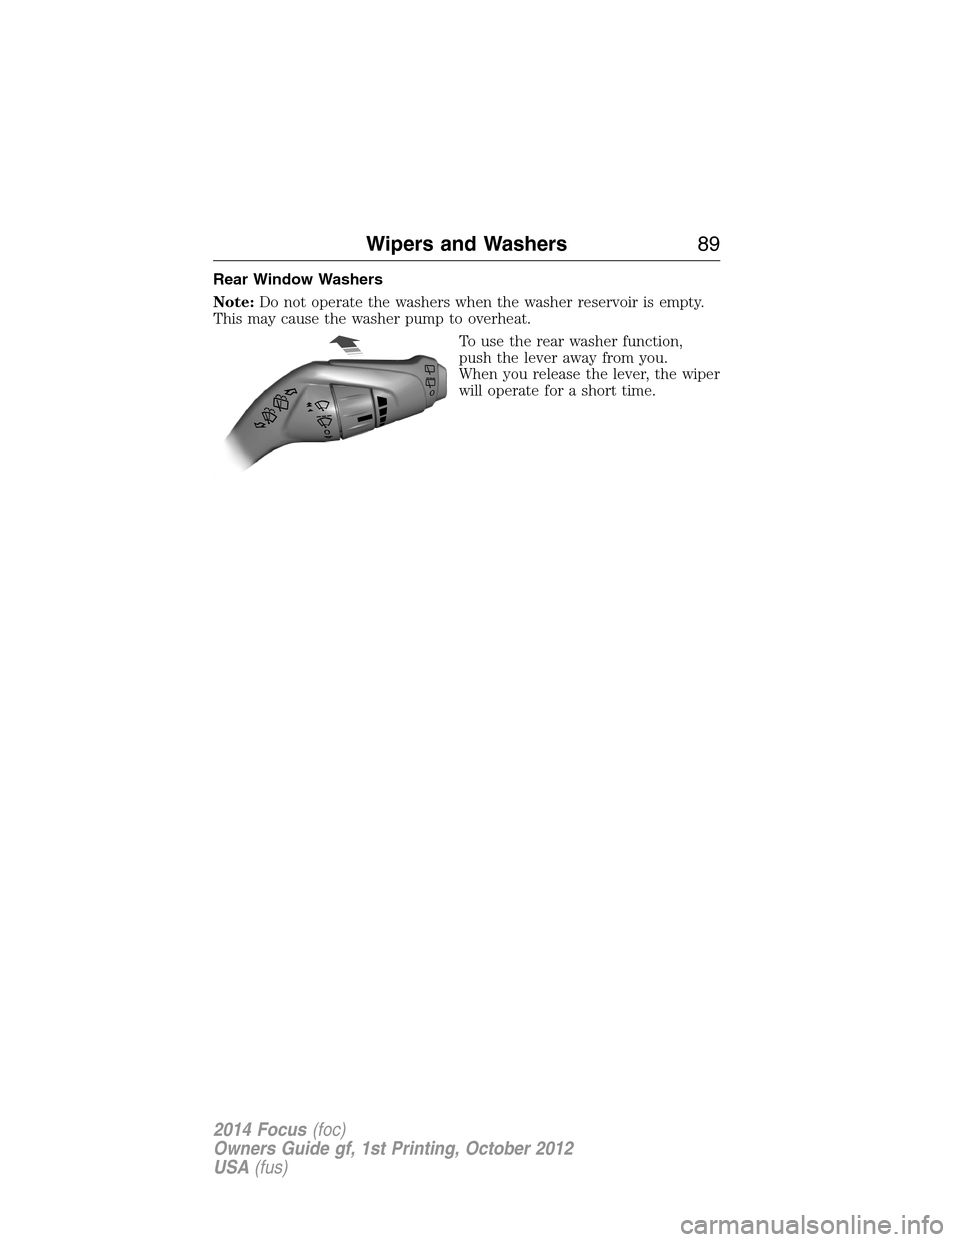 FORD FOCUS 2014 3.G Manual Online Rear Window Washers
Note:Do not operate the washers when the washer reservoir is empty.
This may cause the washer pump to overheat.
To use the rear washer function,
push the lever away from you.
When 